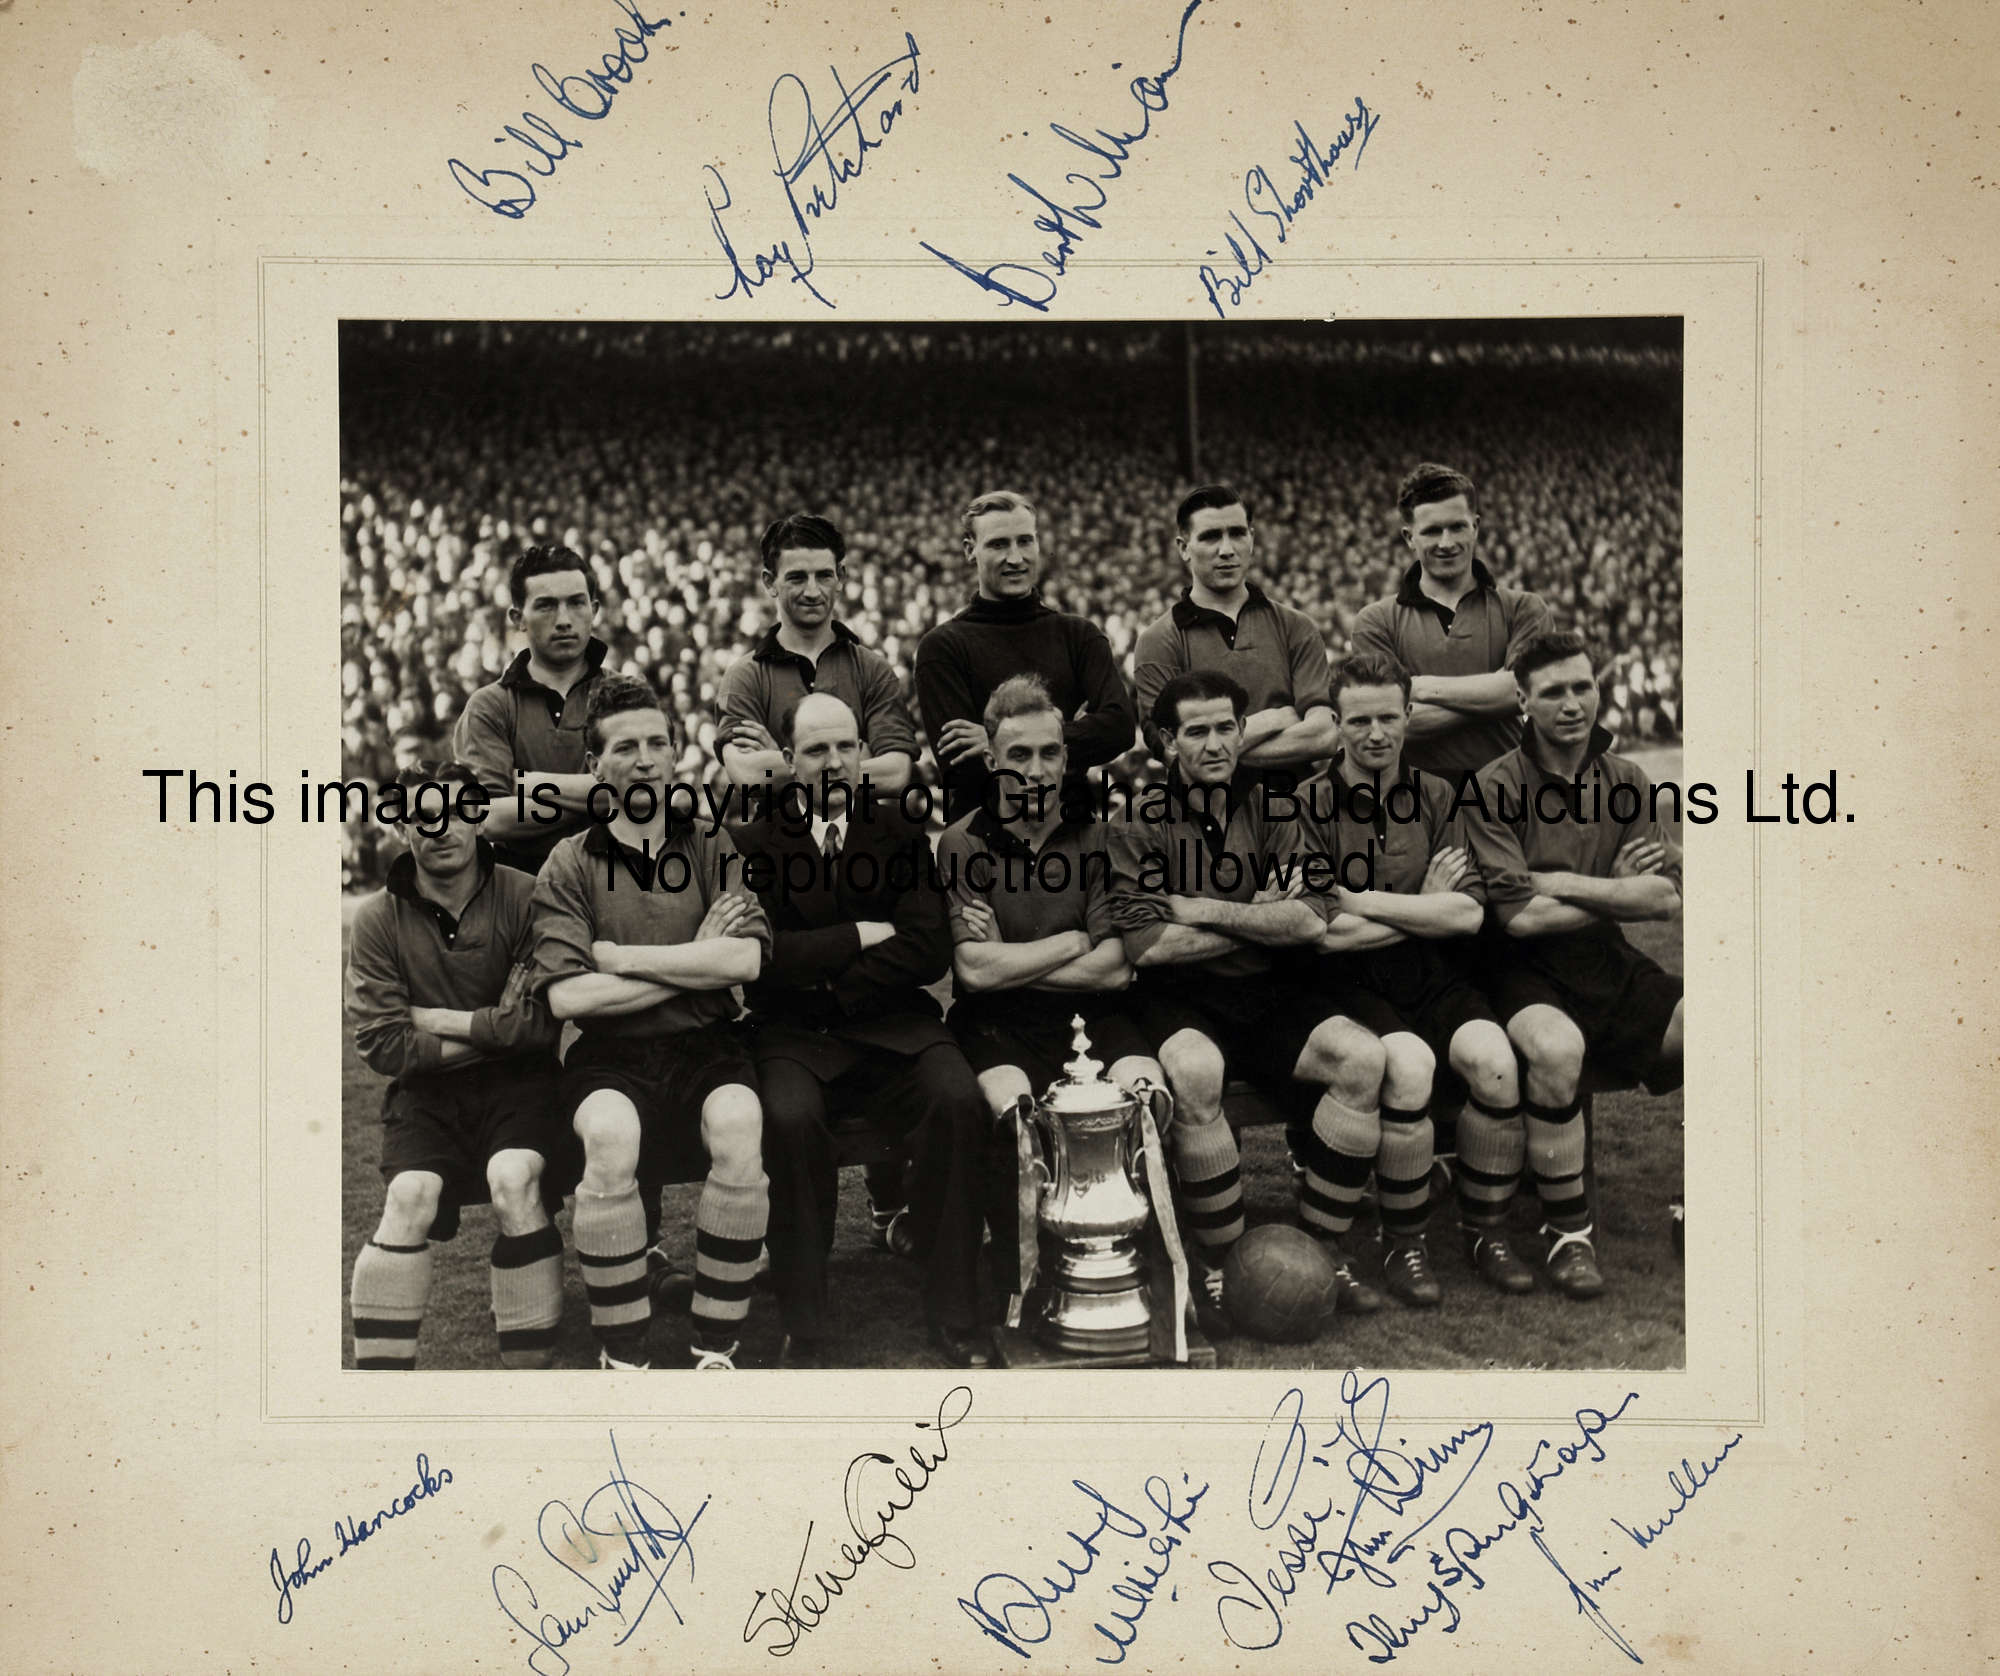 A b&w photograph of the Wolverhampton Wanderers 1949 F.A. Cup winning side fully signed by the 11 fi...